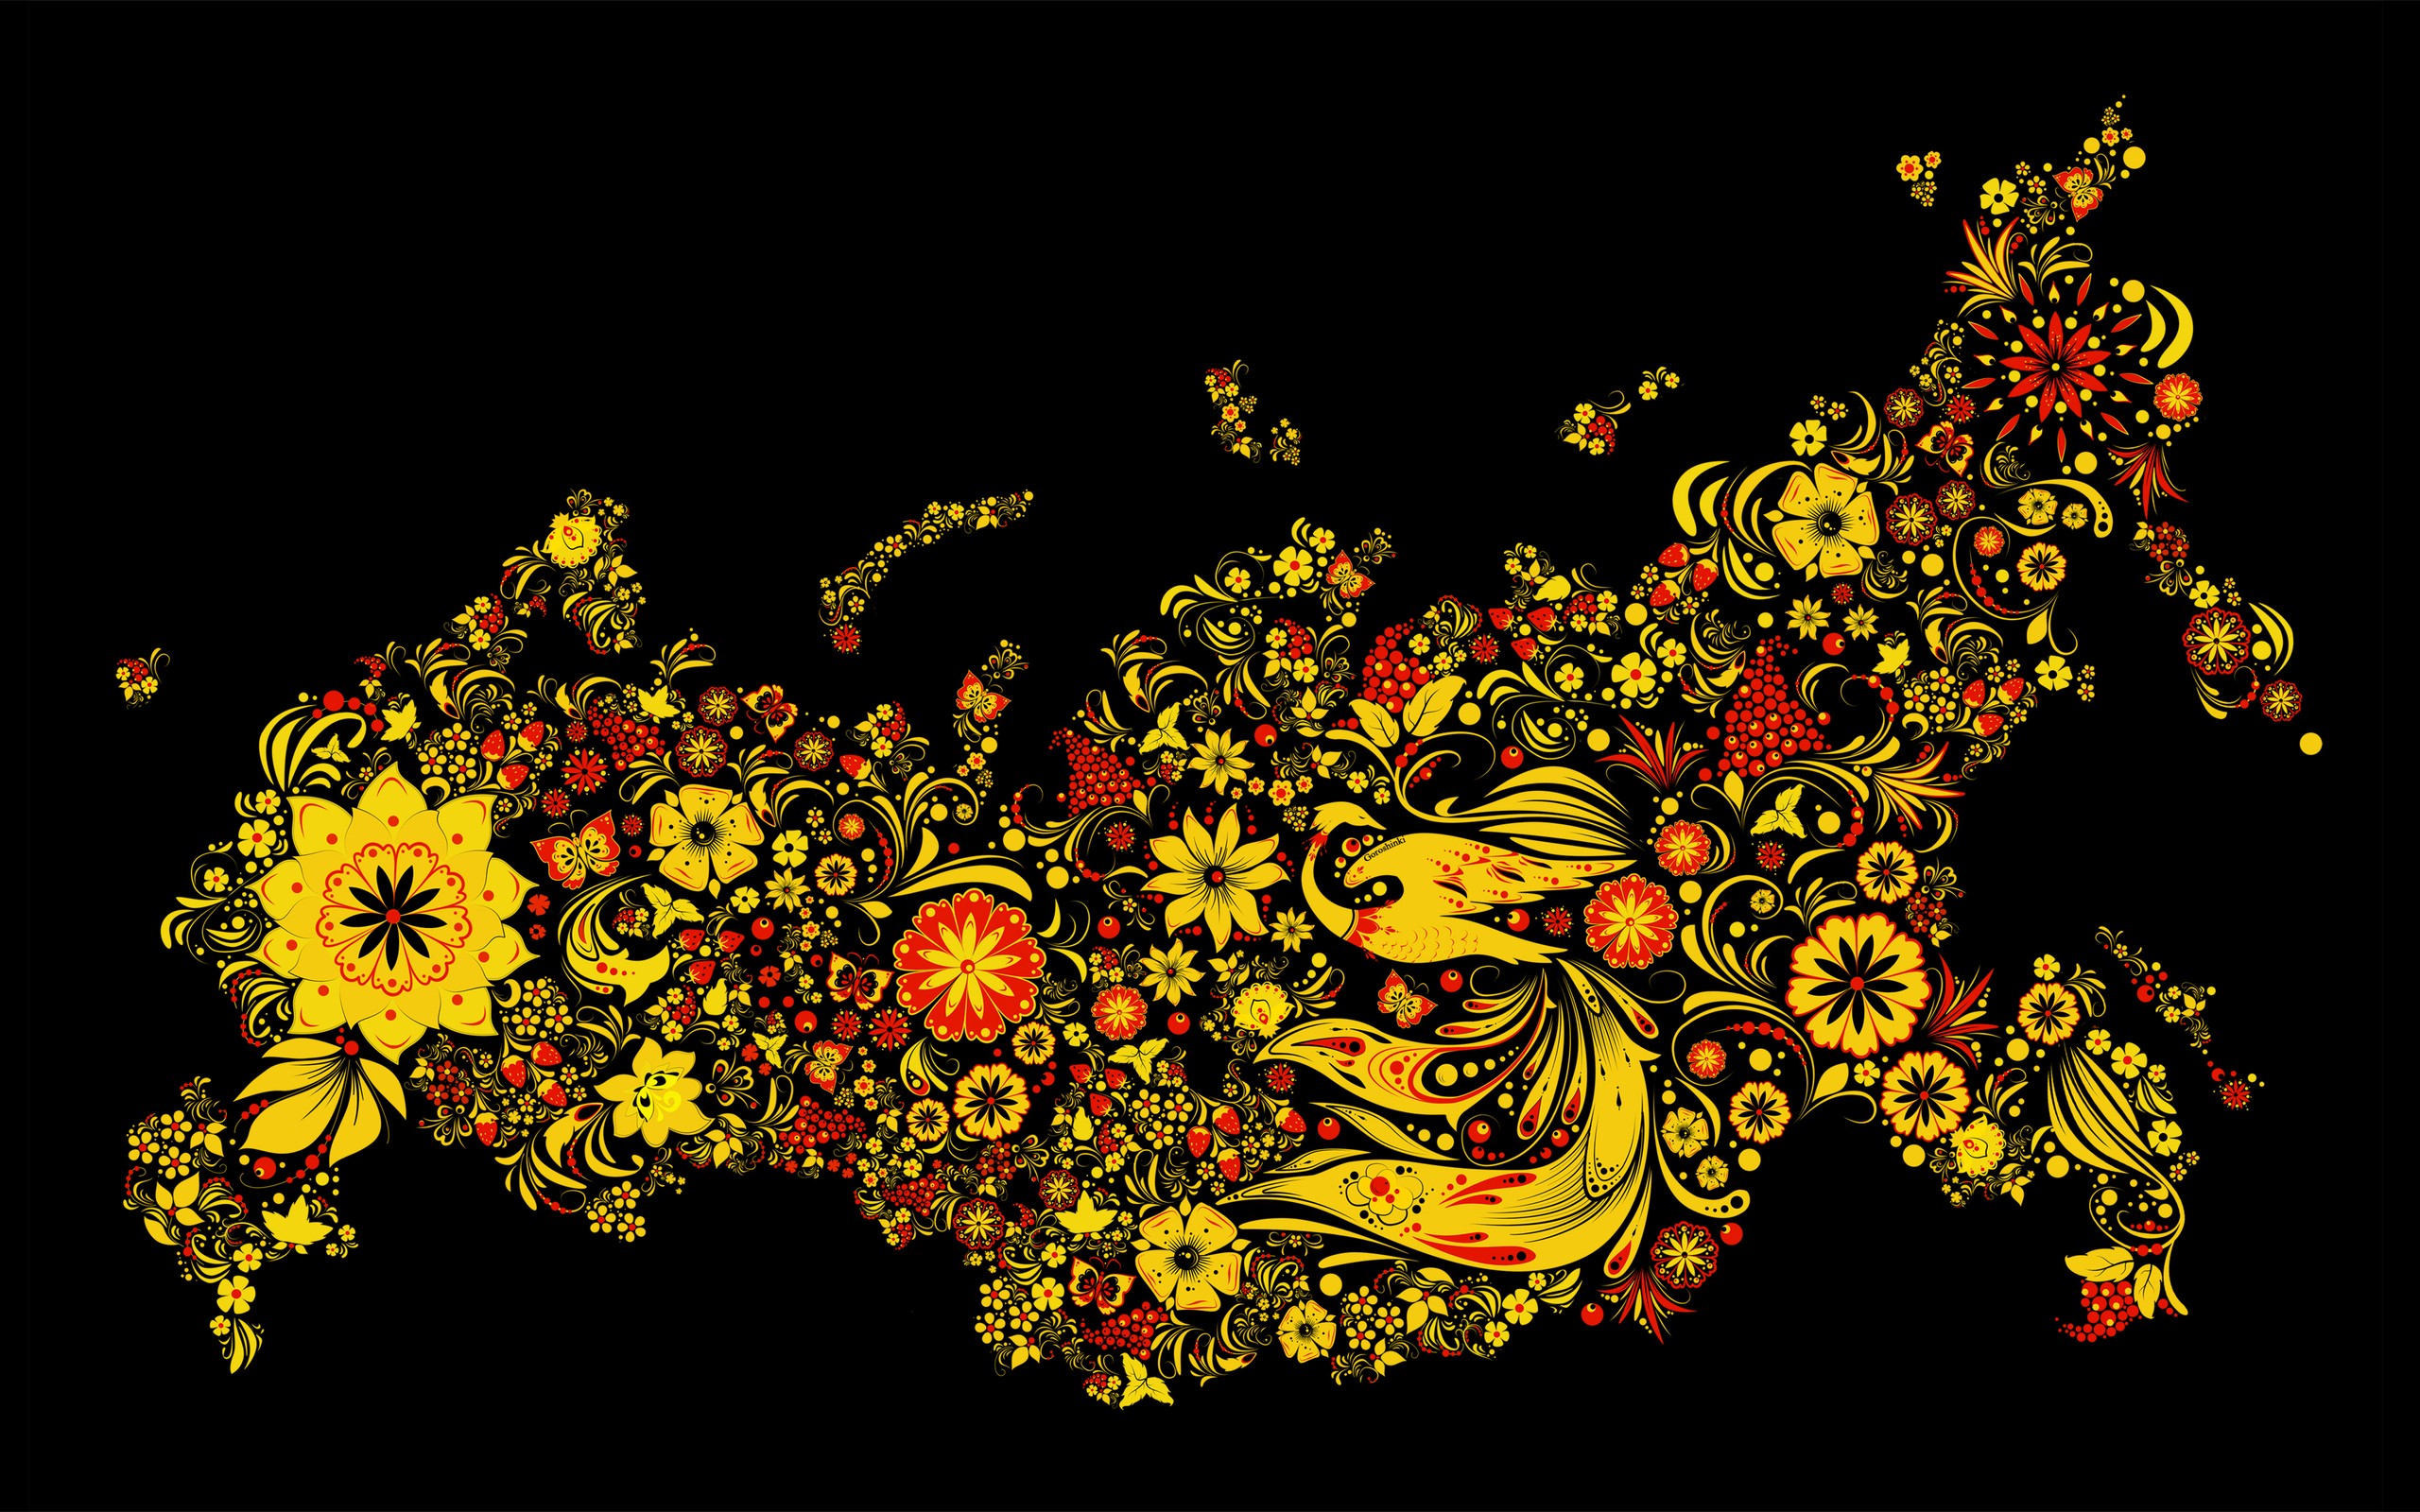 General 2560x1600 Russia abstract flowers plants black background artwork traditional art map